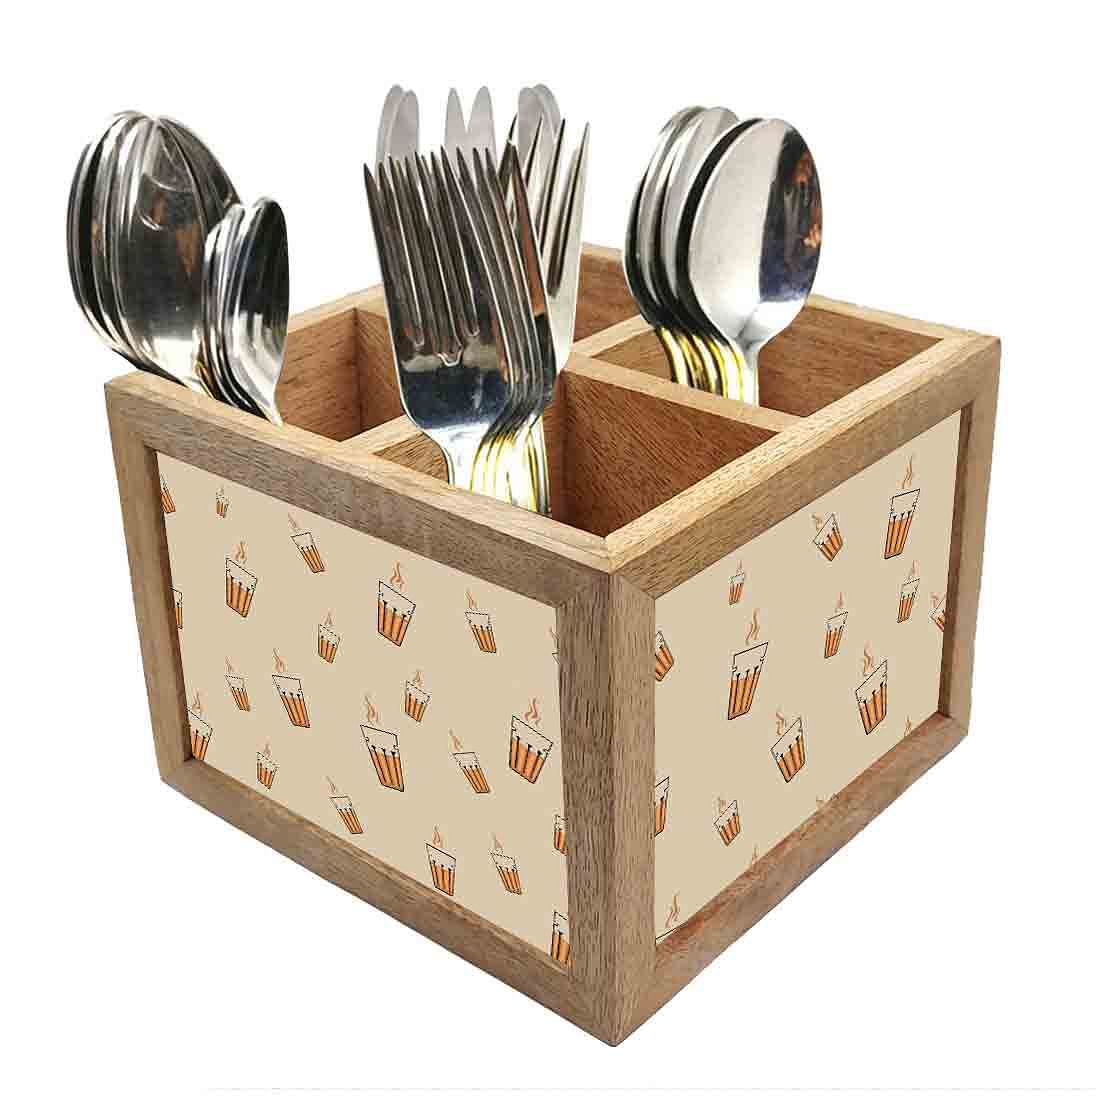 Wooden Spoon Holder for Table Organizer Knives & Forks - Cup of Tea Nutcase